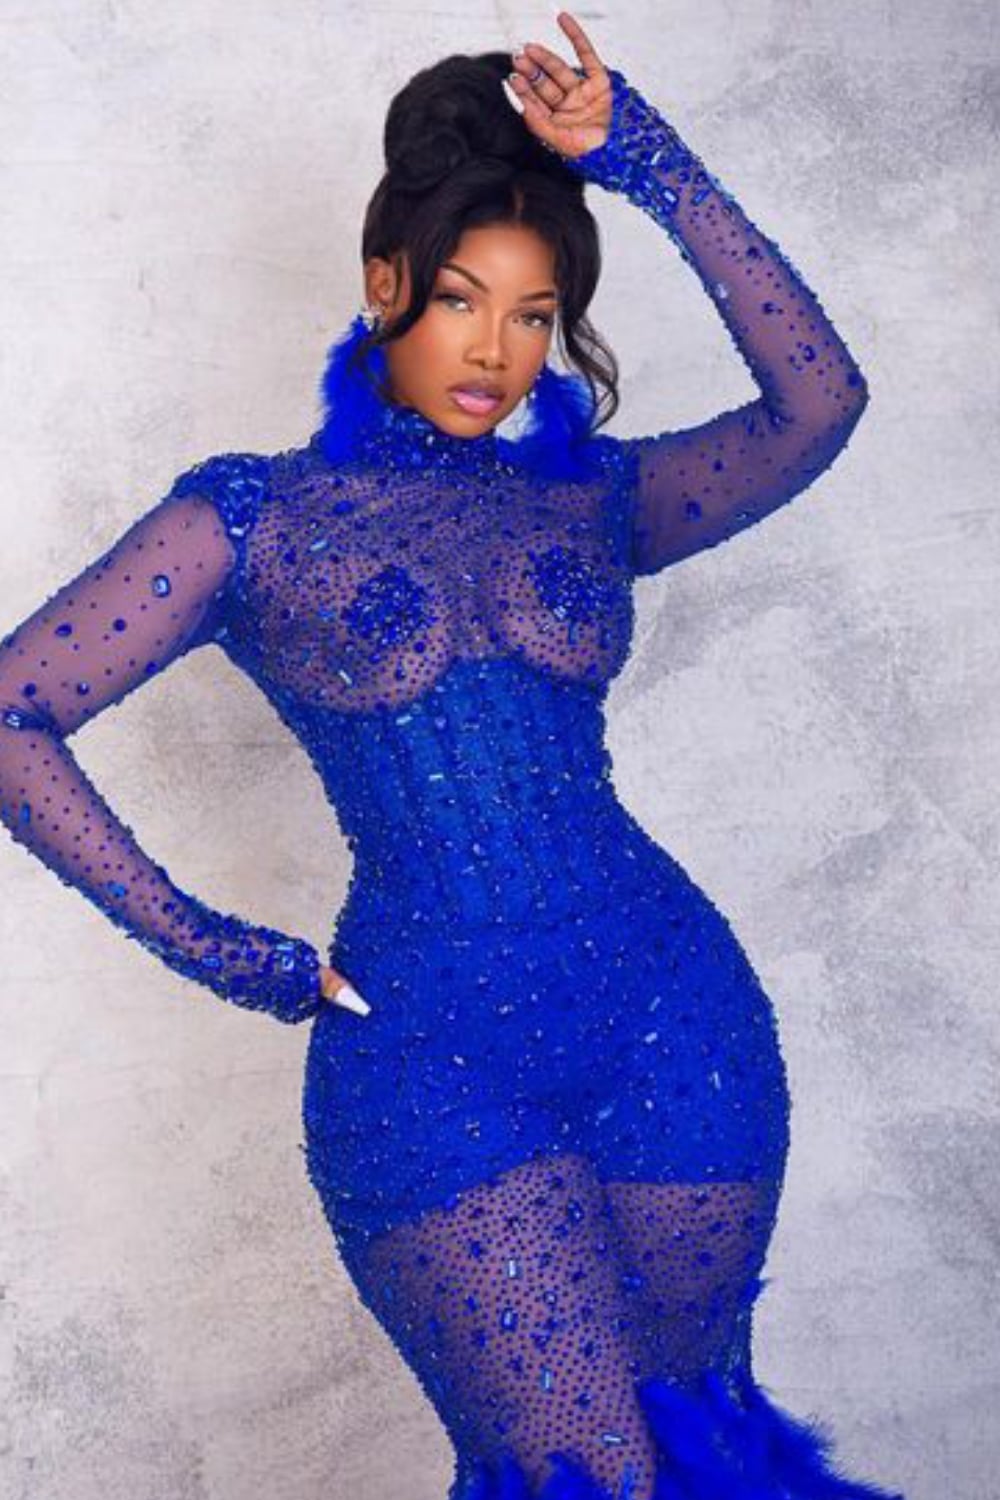 Tacha declares pandemic as she responds to trolls over Mercy Eke’s outfit